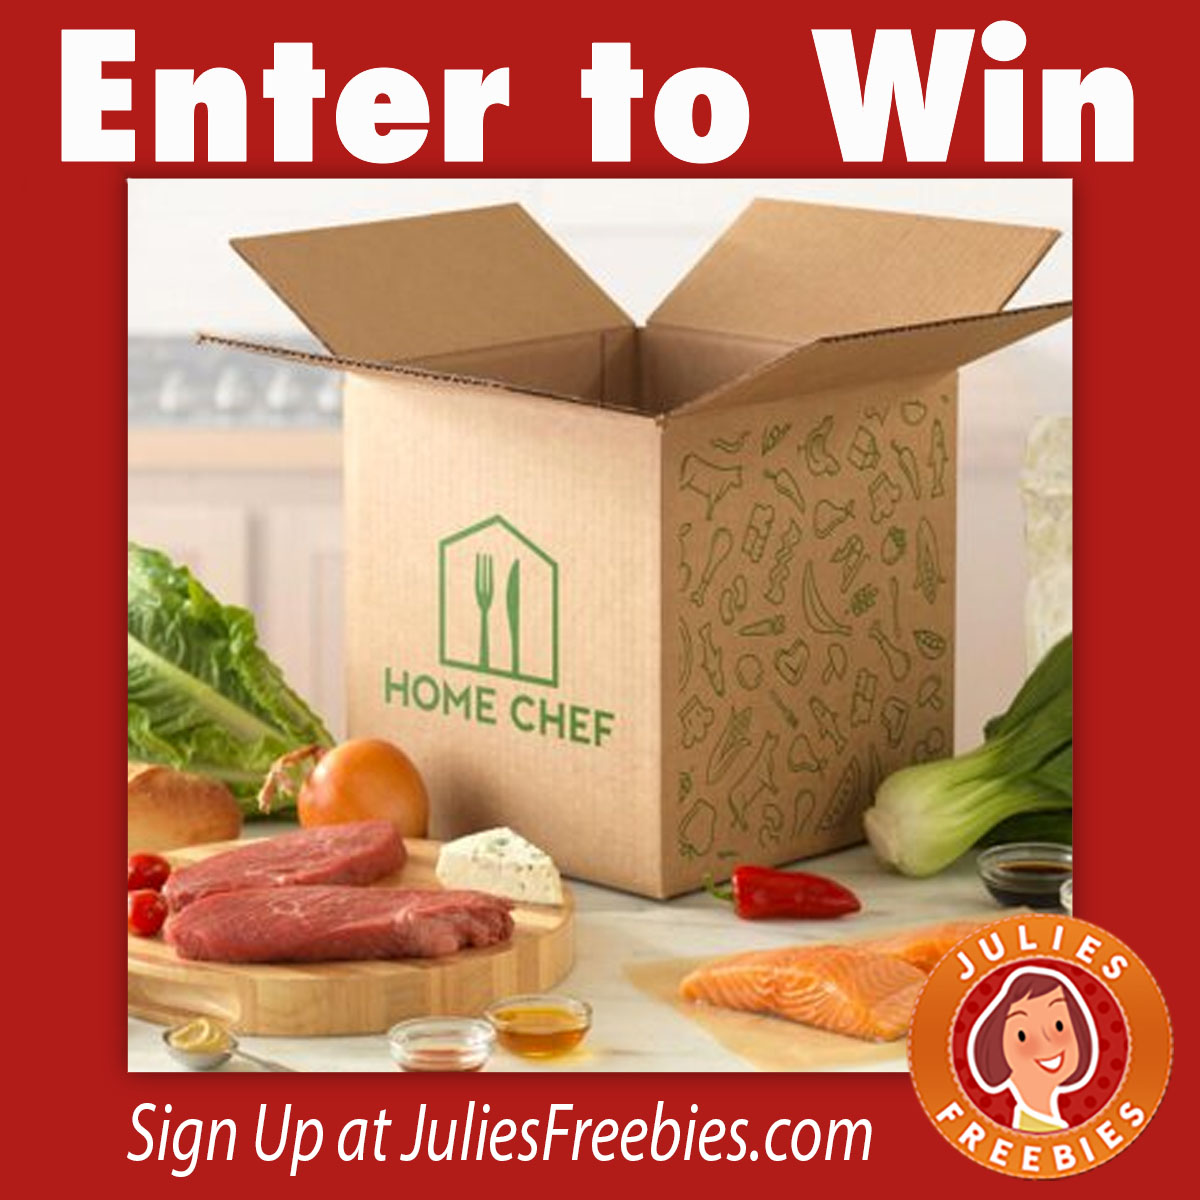 Home Chef Meal Delivery Giveaway Julie's Freebies